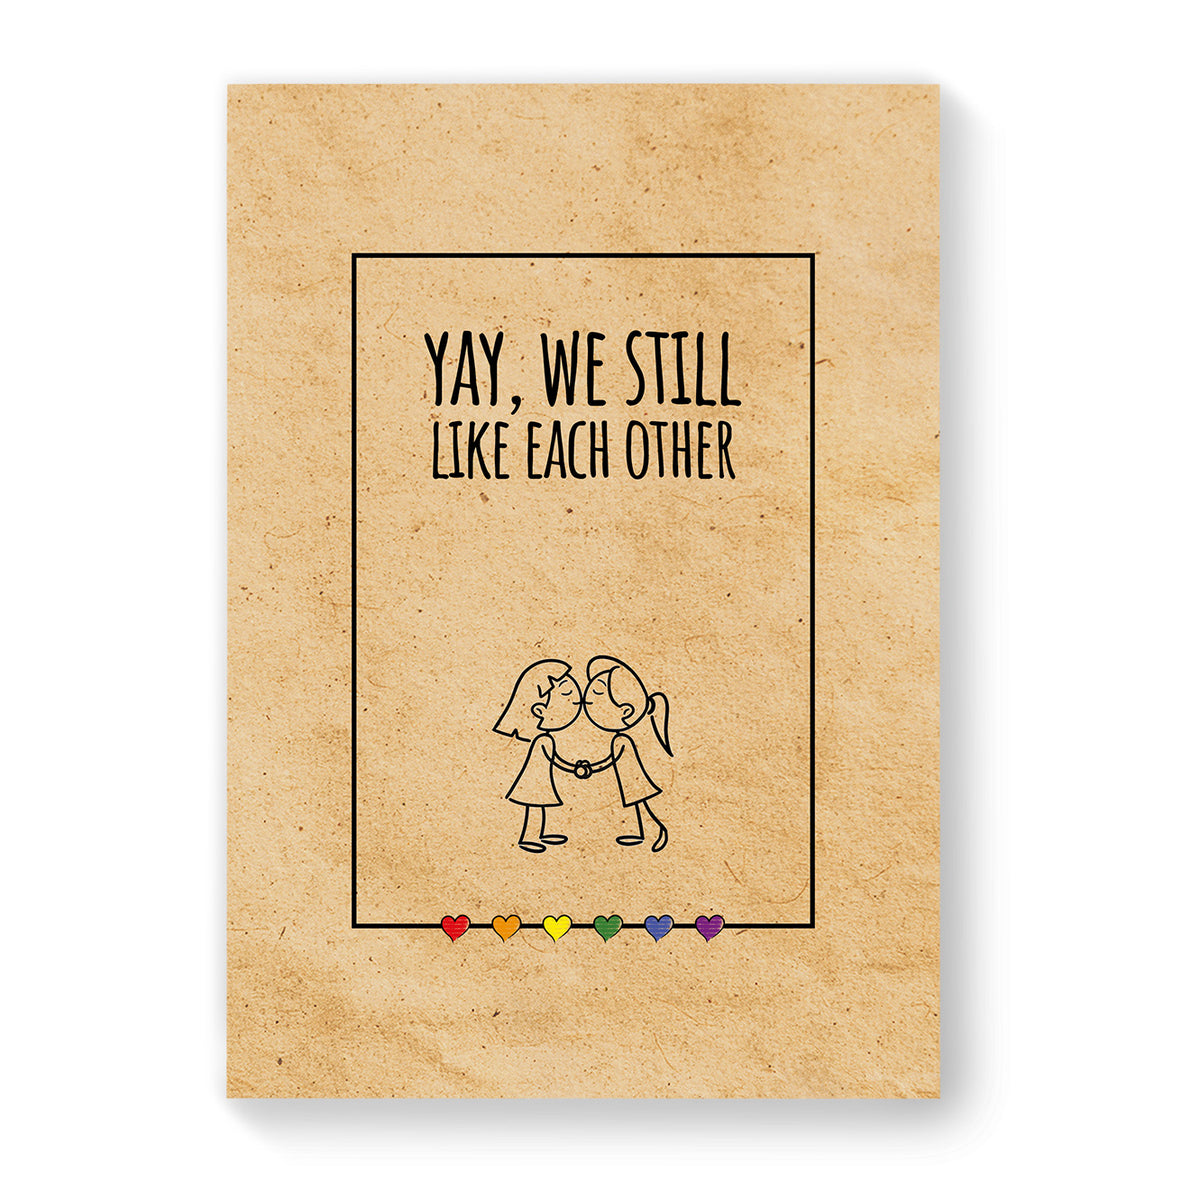 Yay, we still like each other - Lesbian Gay Couple Card - Vintage Brown | Gift